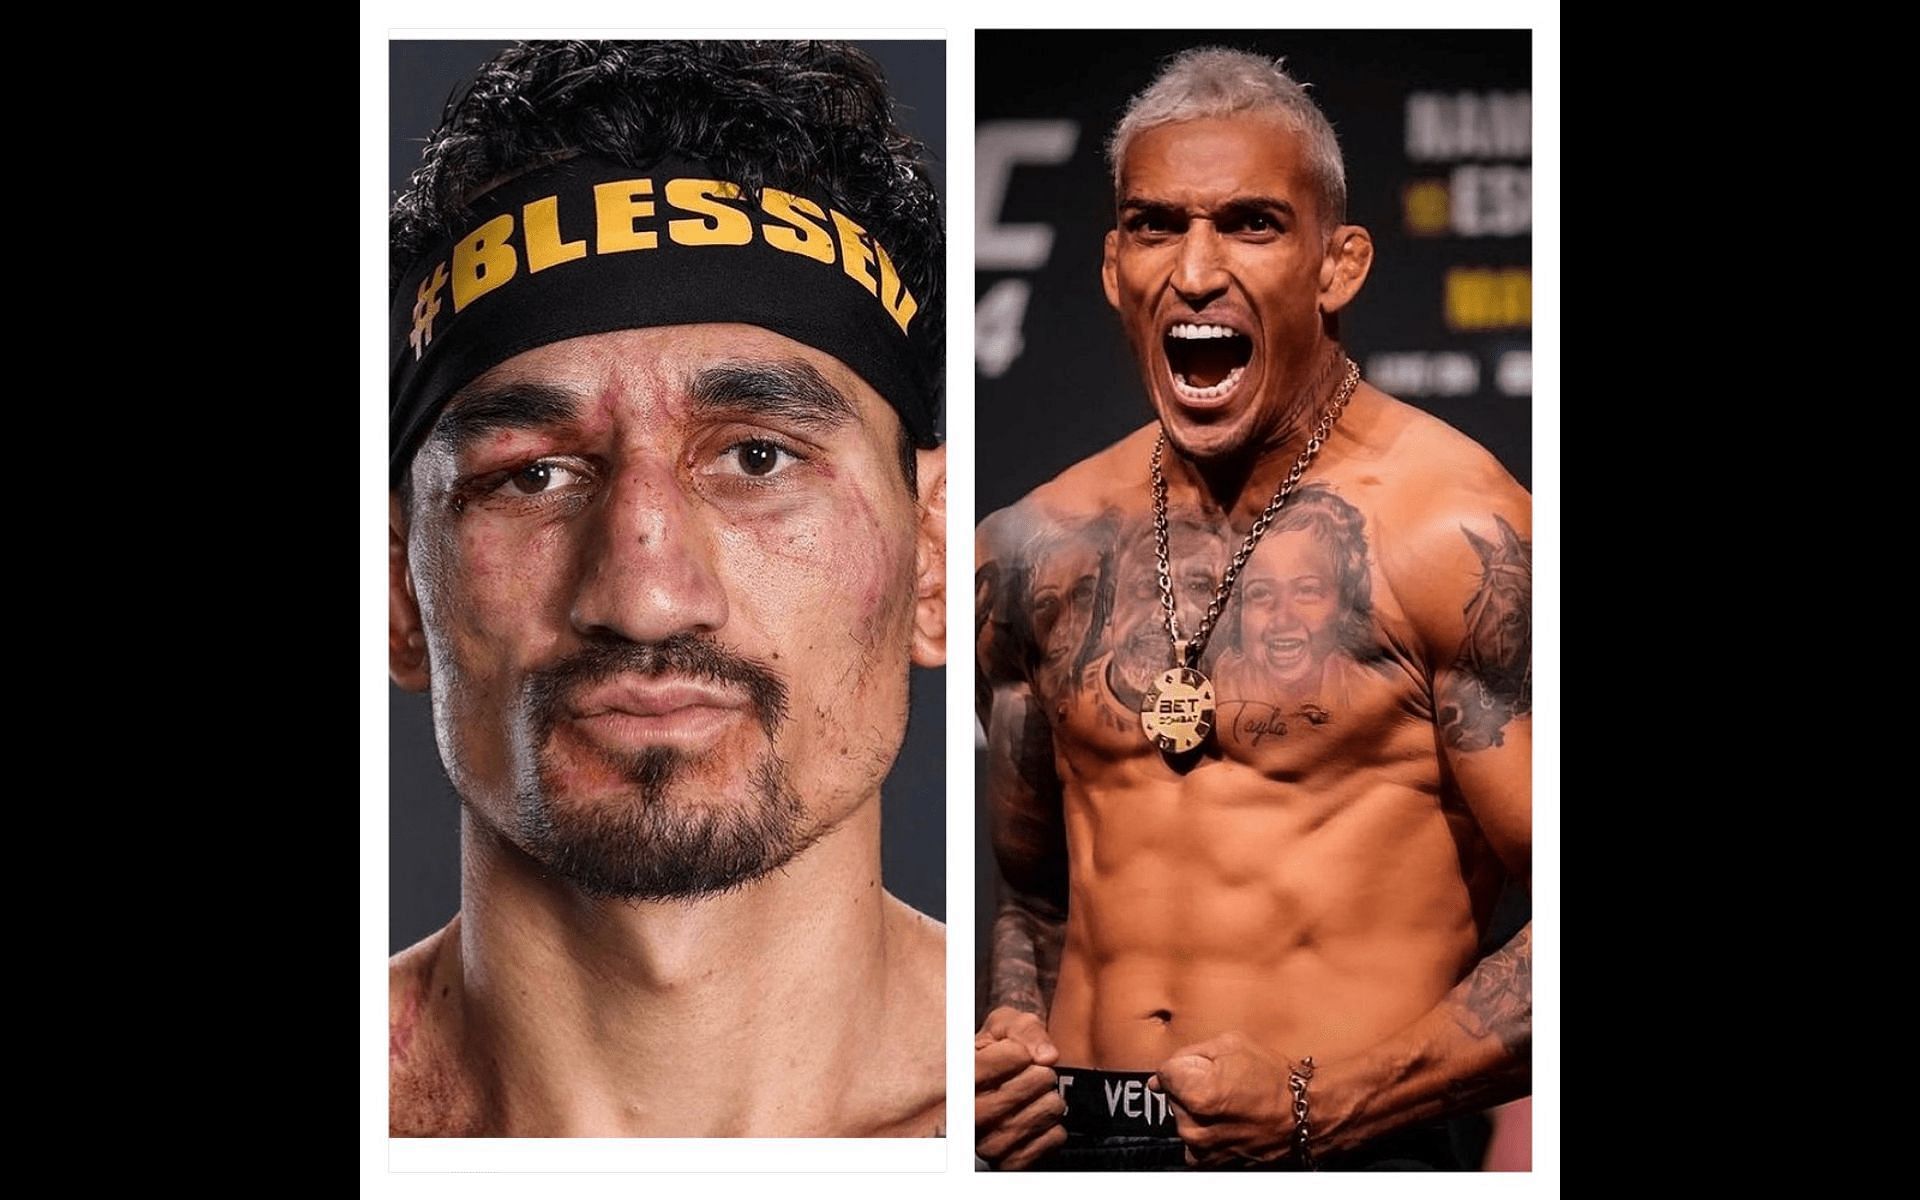 Max Holloway (left) and Charles Oliveira (right) [images courtesy of @blessedmma and @charlesdobronxs on Instagram]